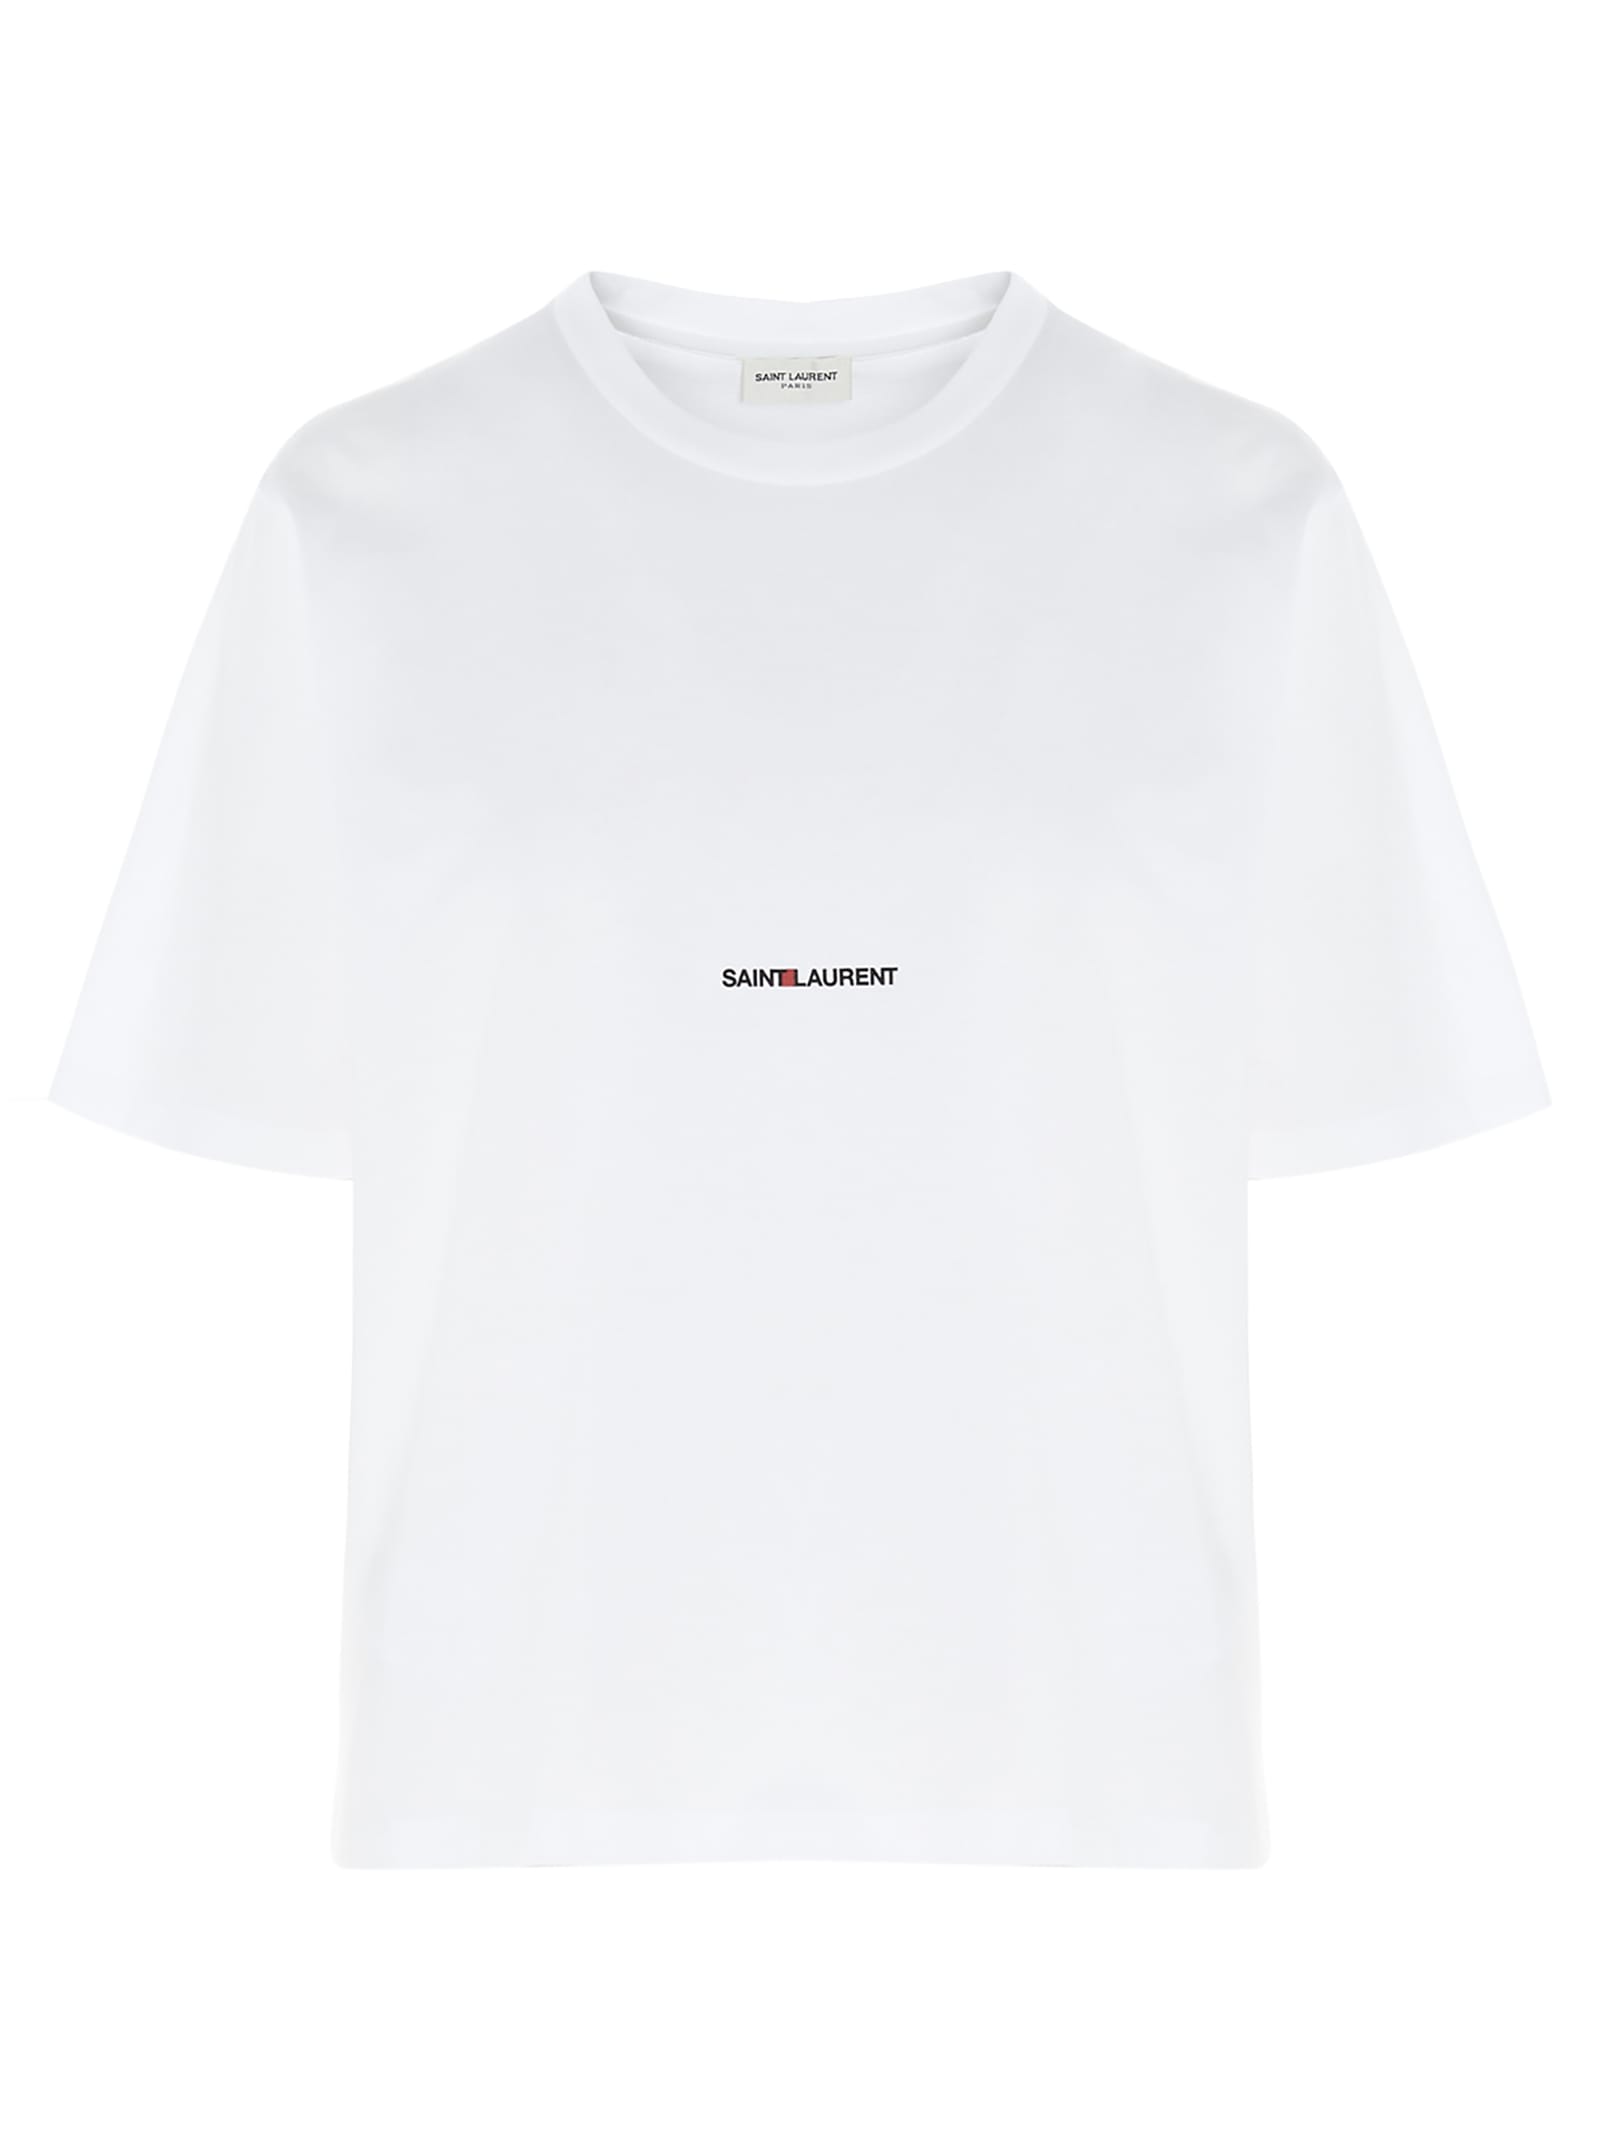 Saint Laurent Printed Cotton-jersey T-shirt In White | ModeSens